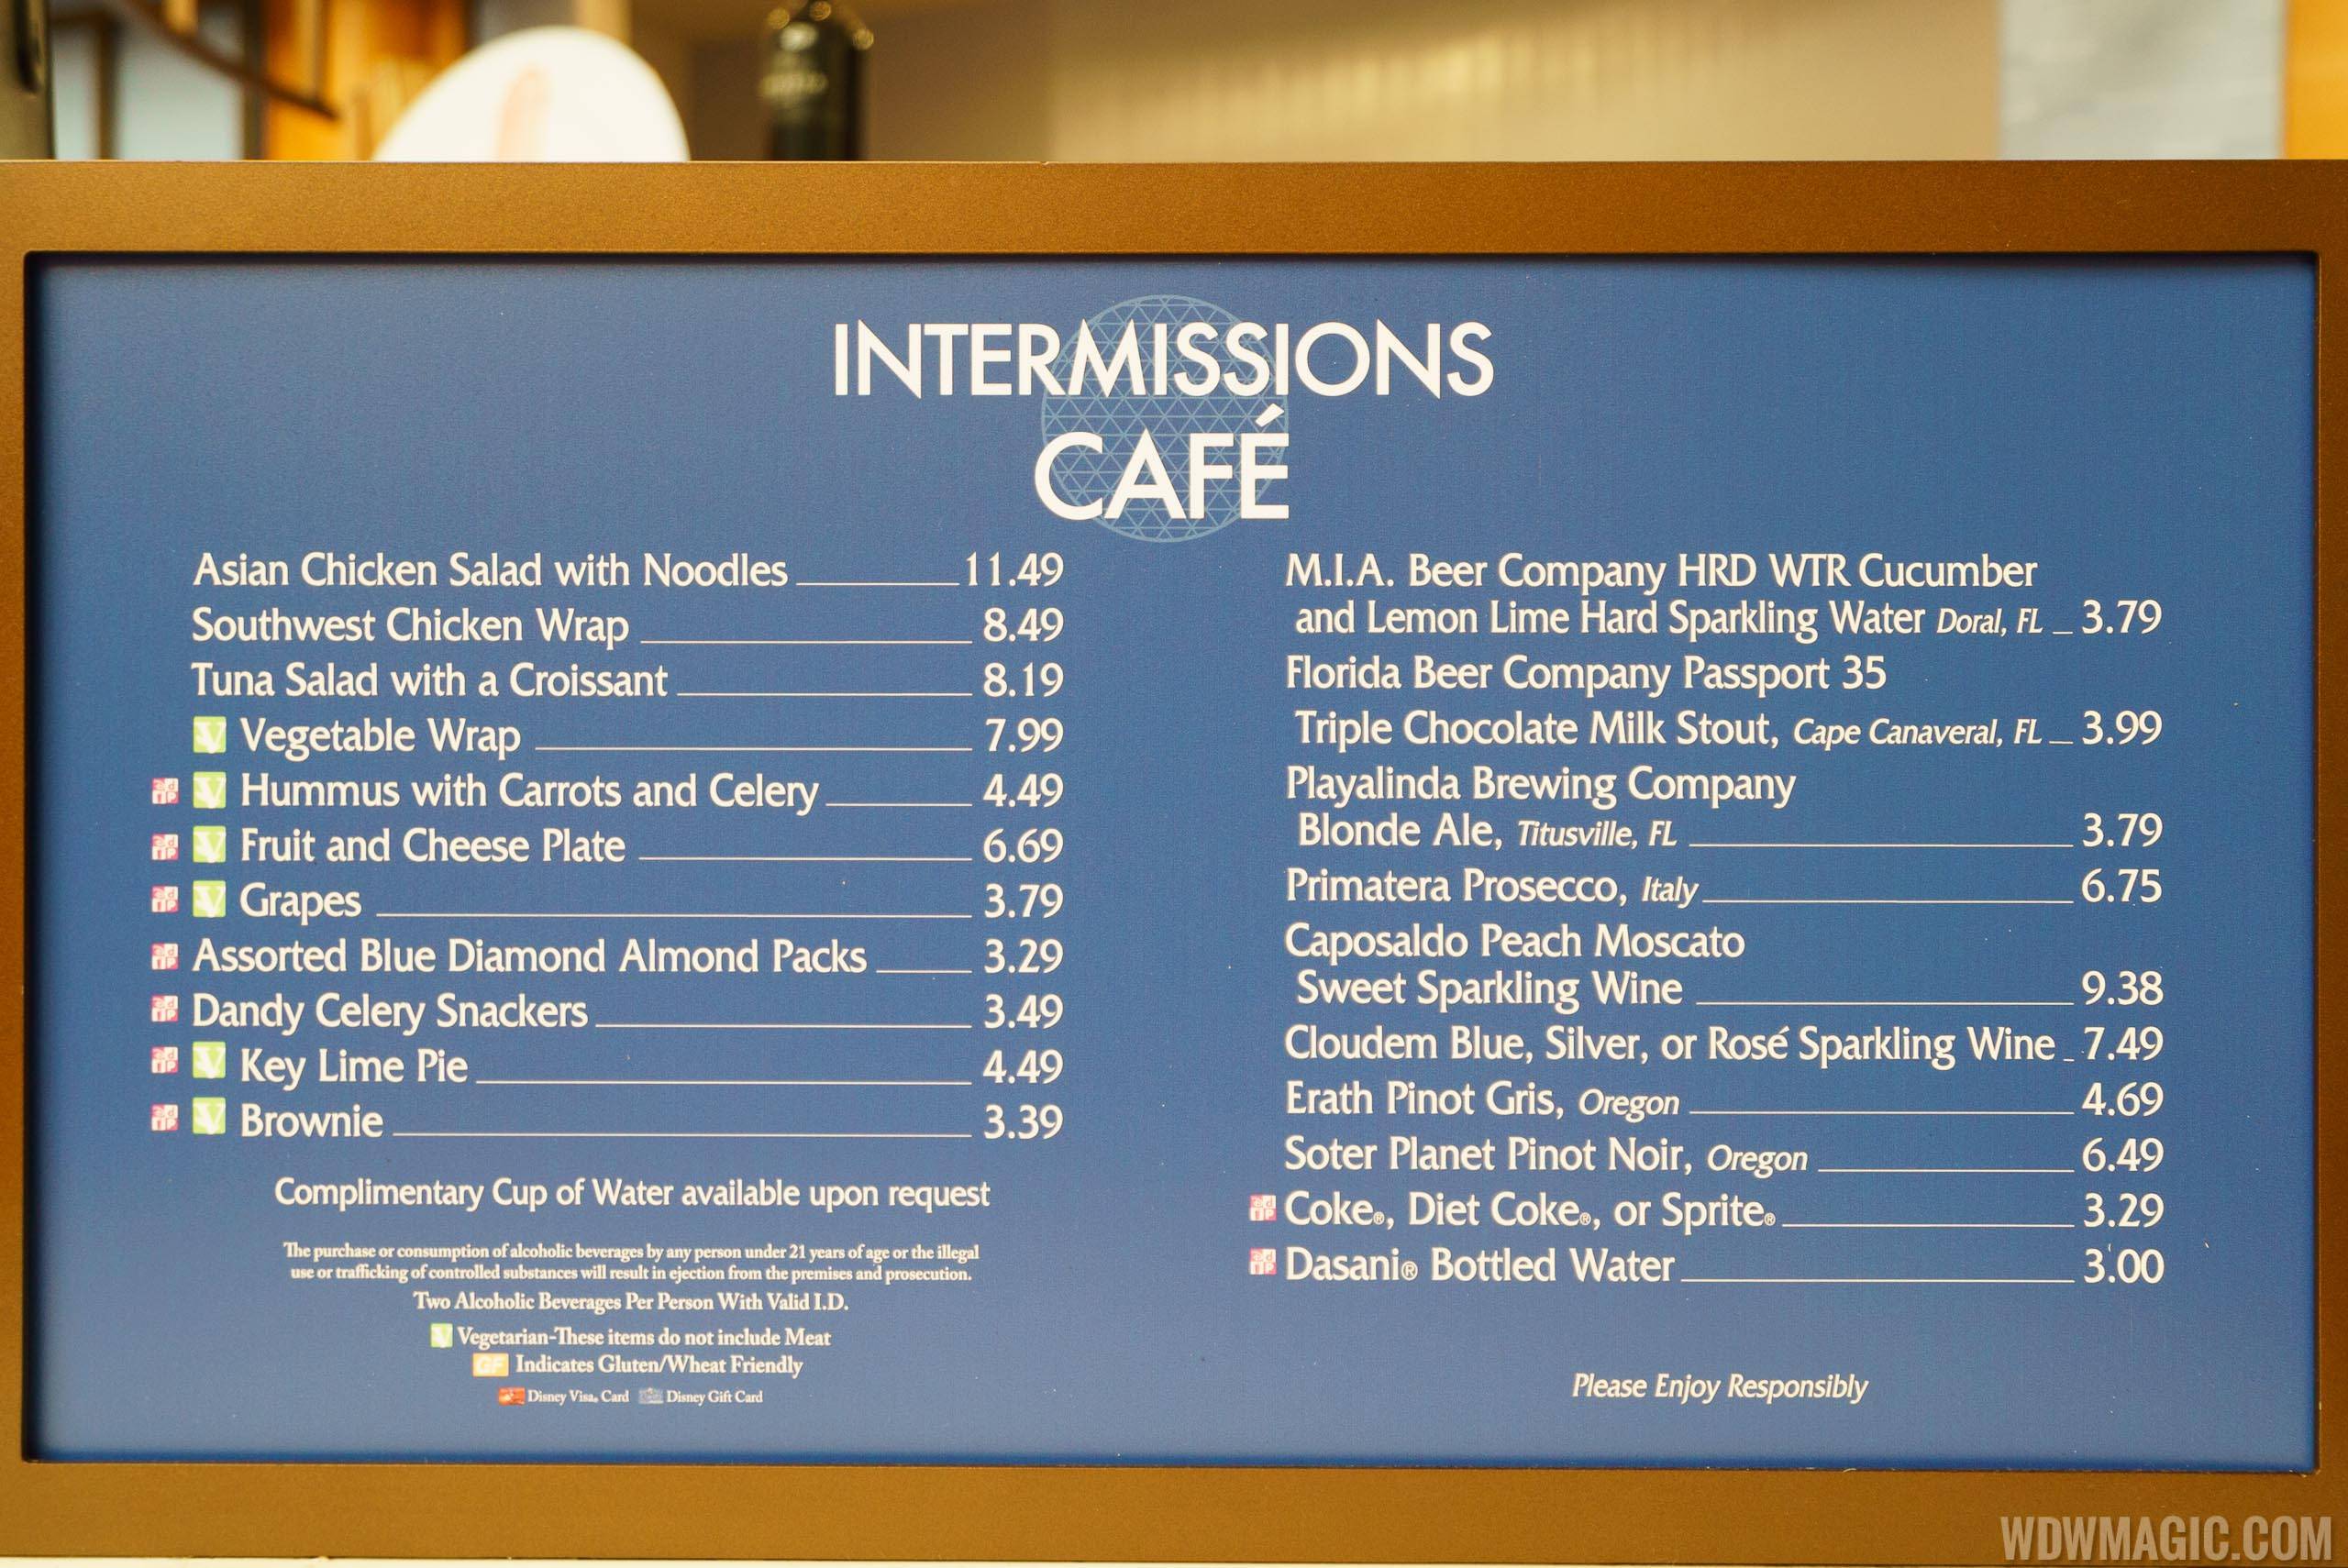 2017 Epcot Food and Wine Festival - Intermissions Cafe marketplace menu